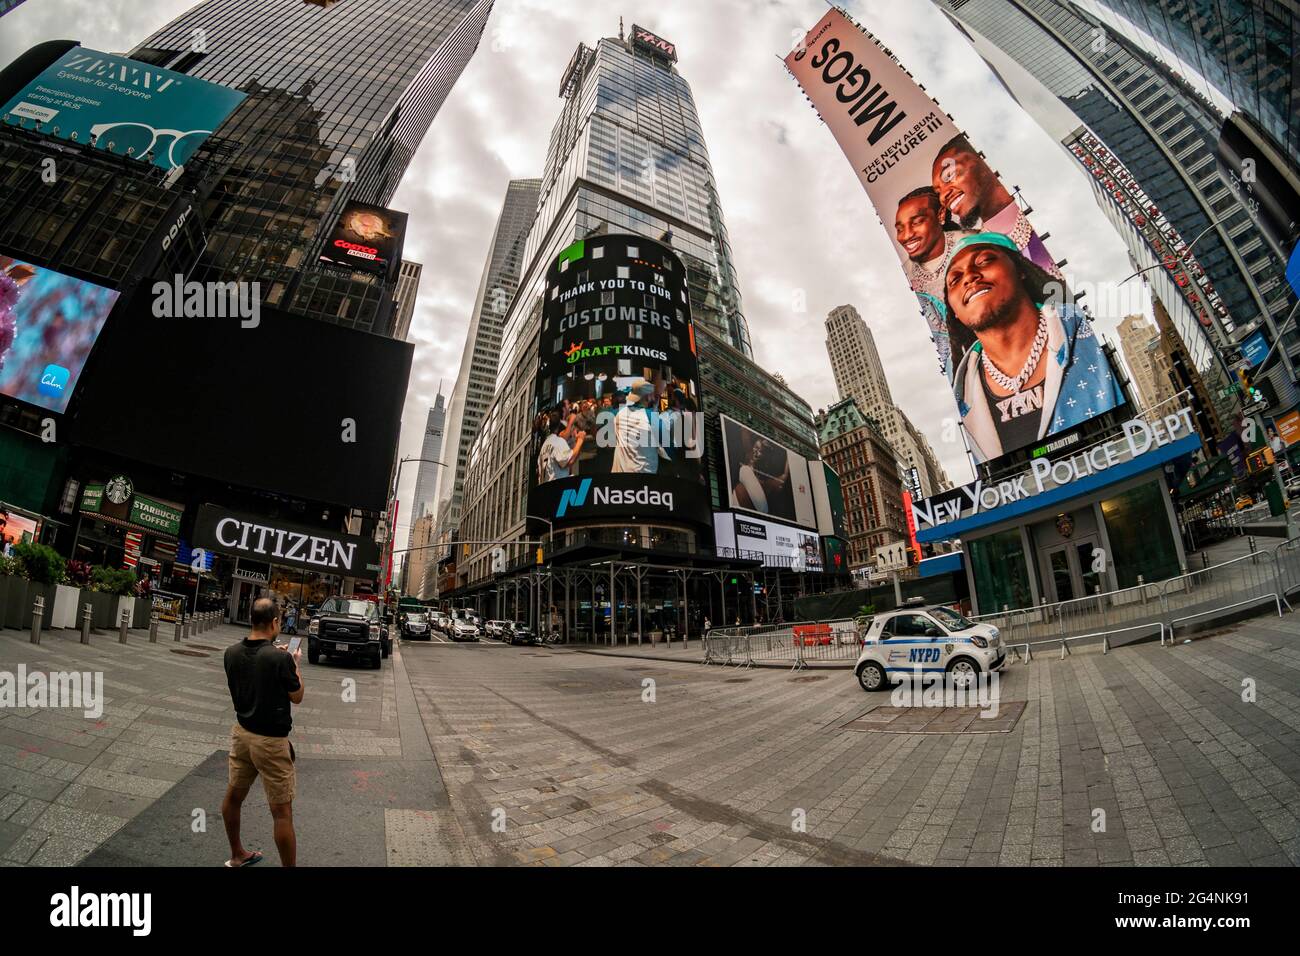 The Nasdaq stock exchange is decorated for a belated welcoming for DraftKings, in Times Square in New York on Frida June 11, 2021.  DraftKings went public in April 2020 combining with a SPAC.(© Richard B. Levine) Stock Photo